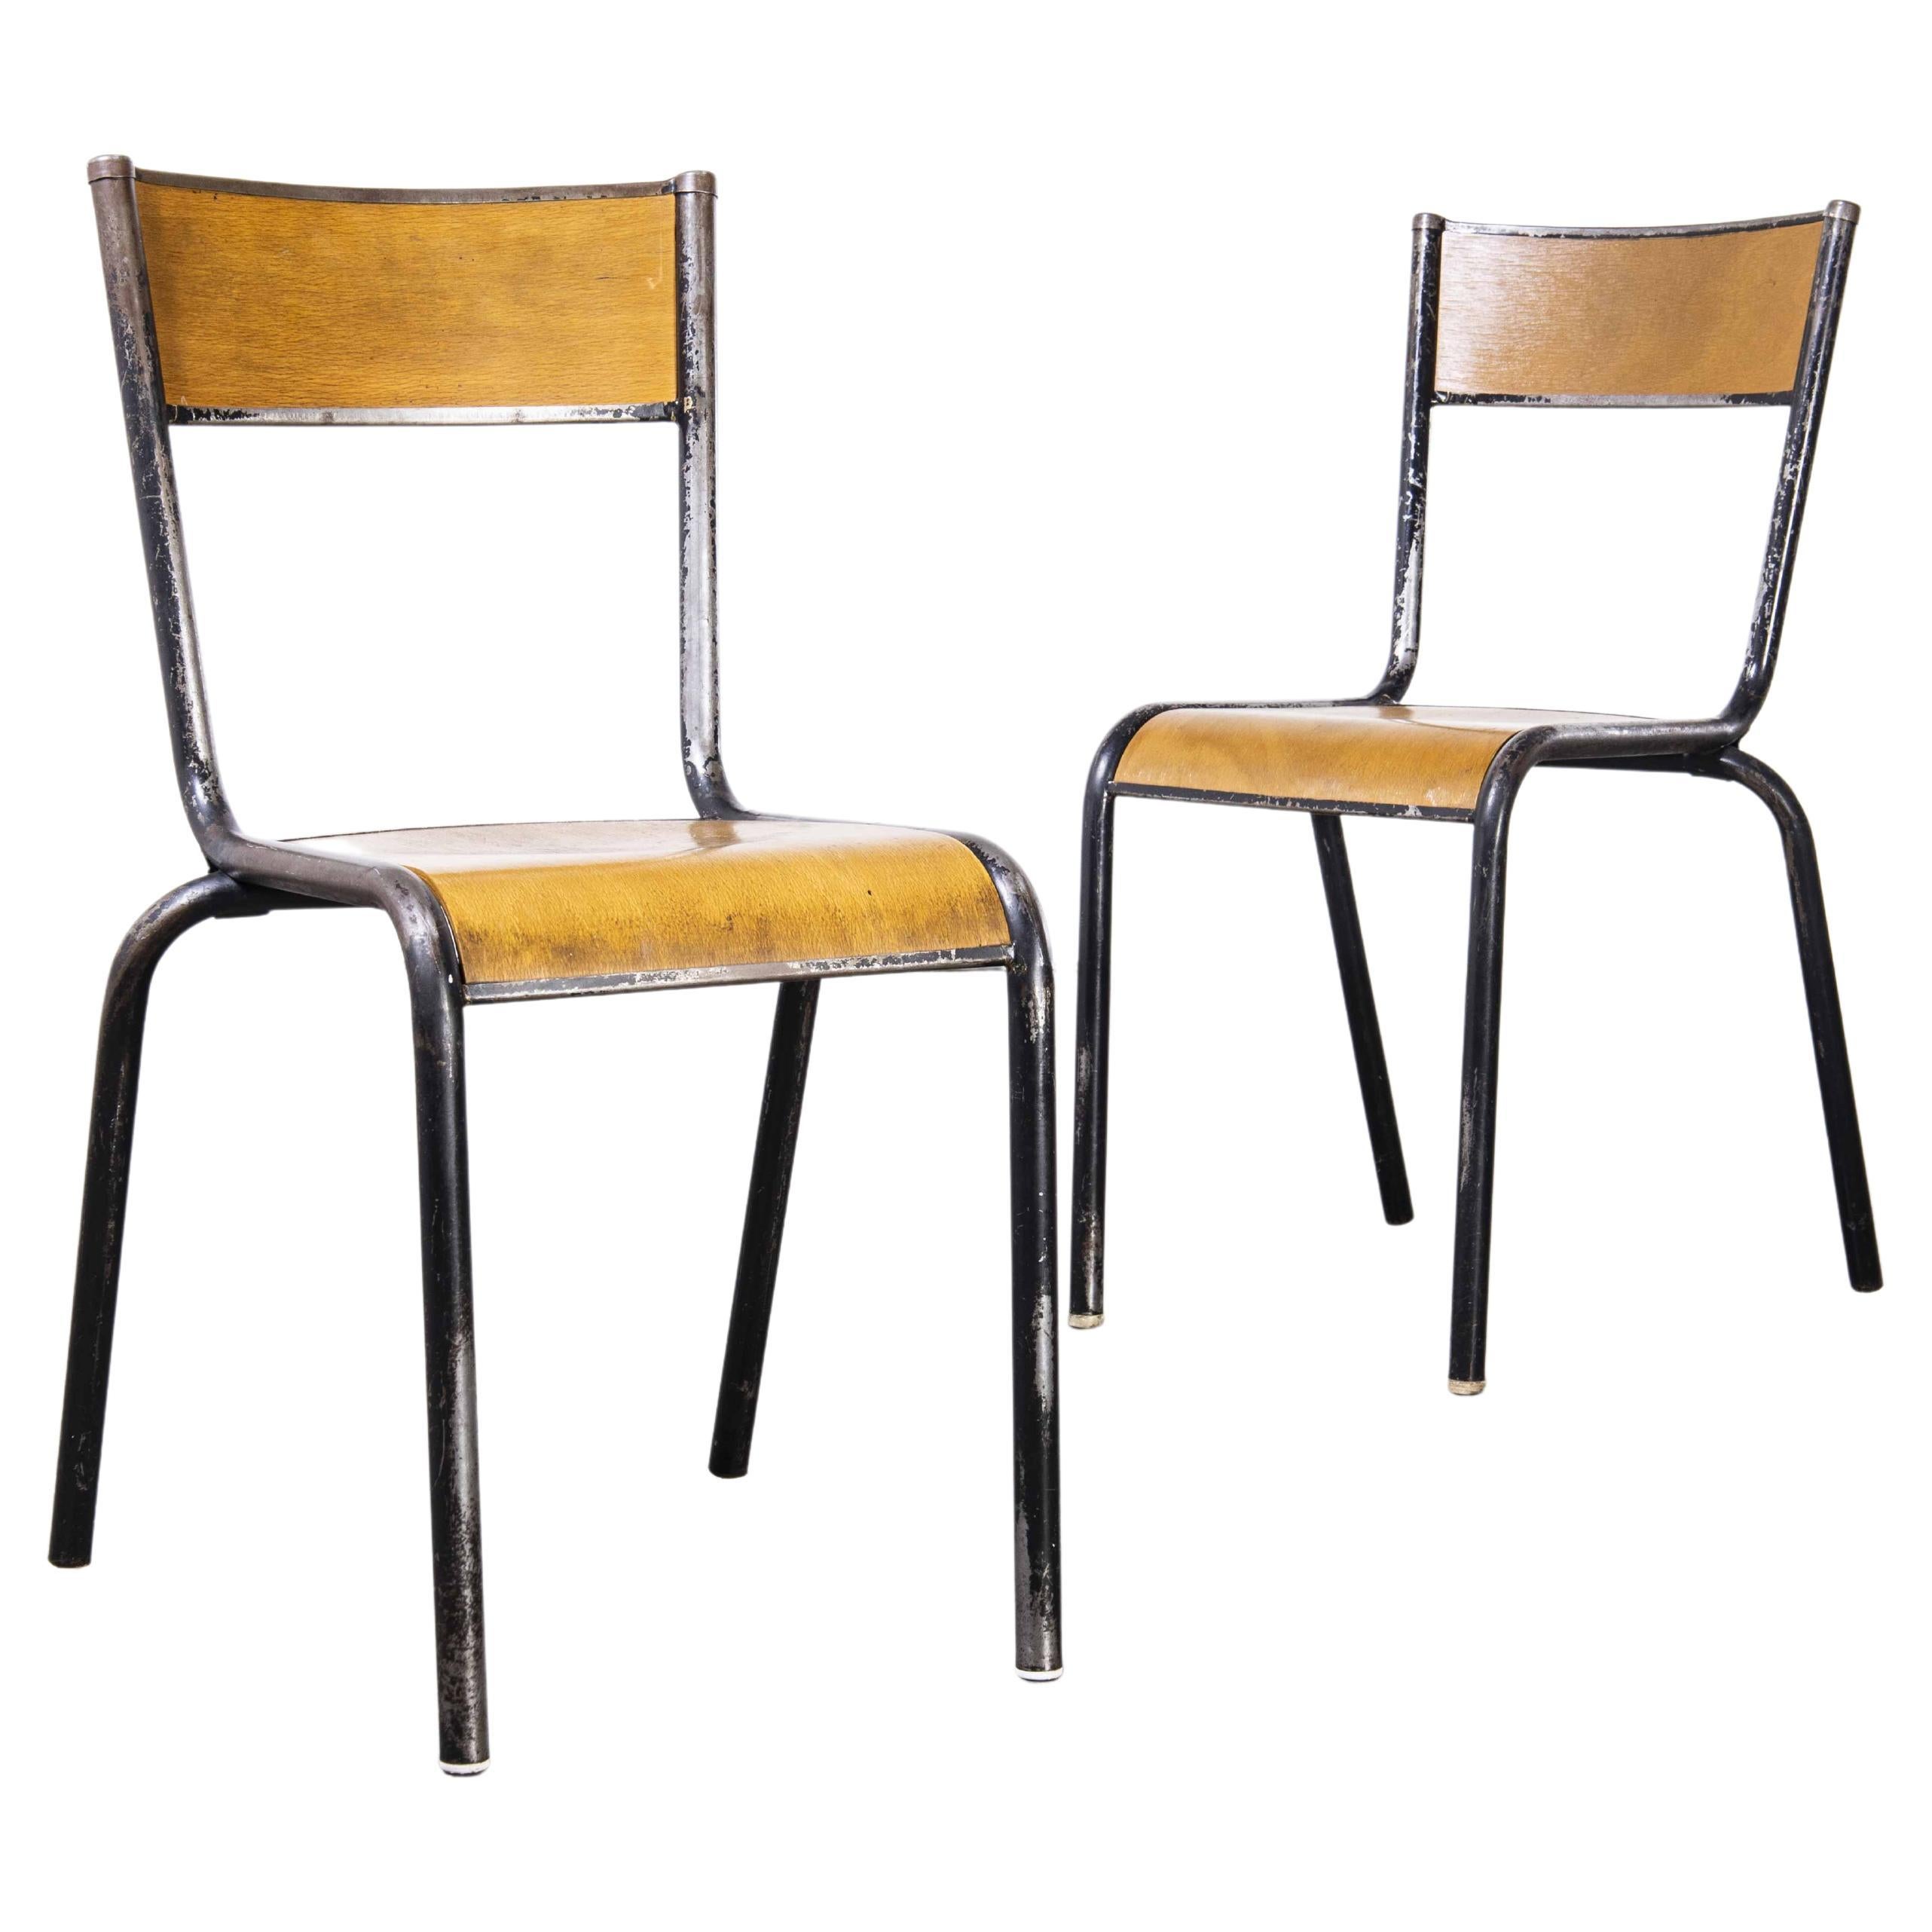 1960's, French Mullca Stacking Chair, Black Frame, Pair For Sale